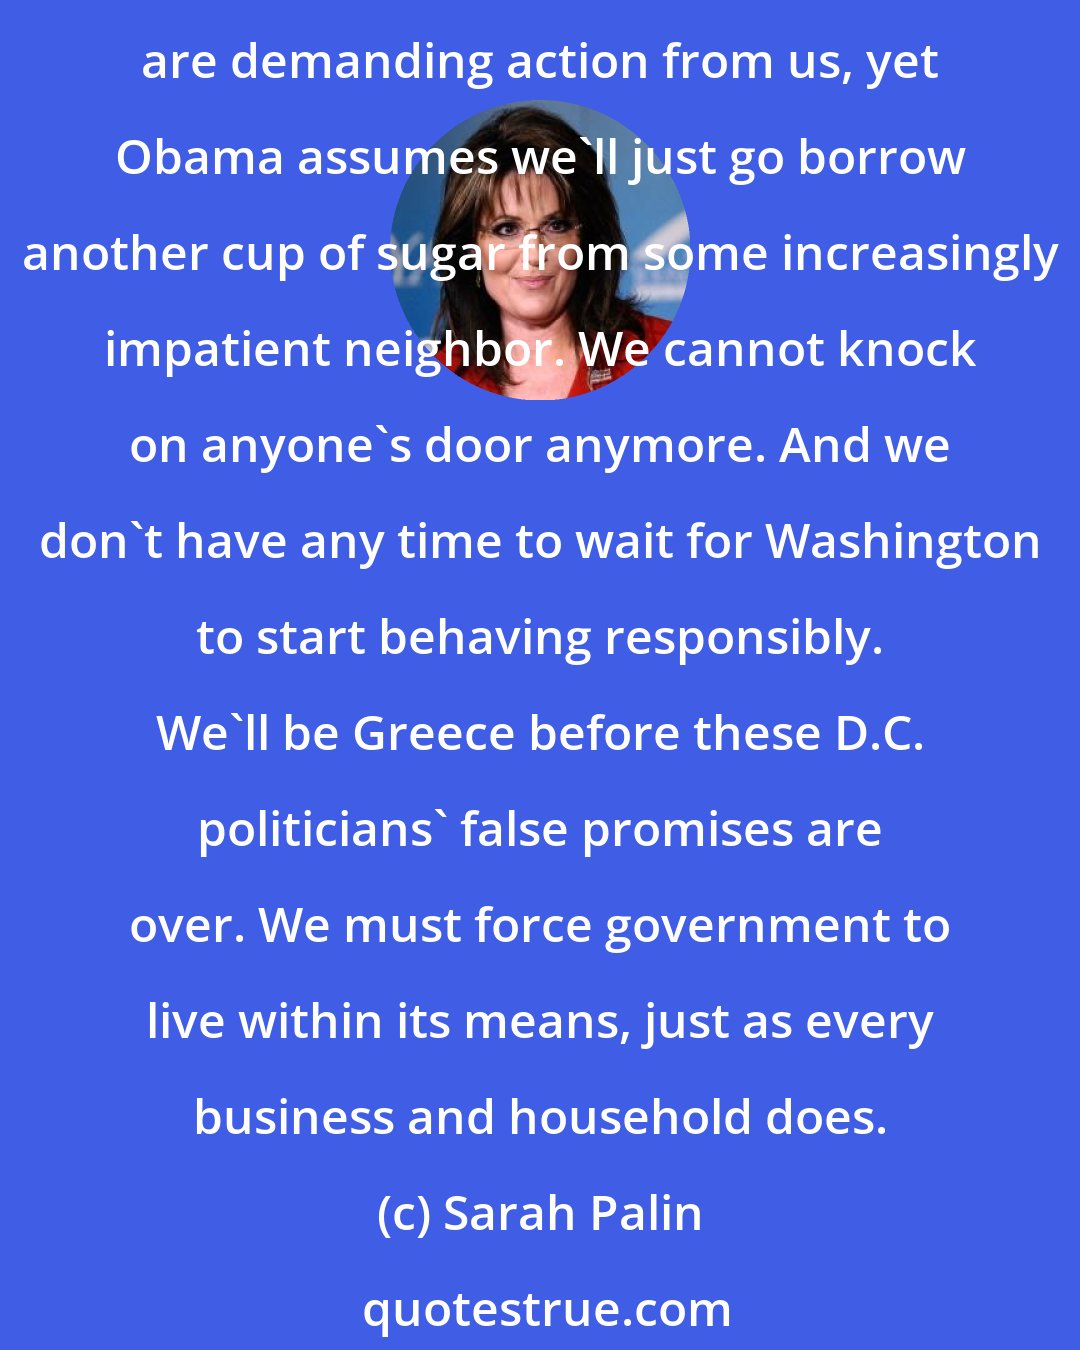 Sarah Palin: To paraphrase Hemingway, people go broke slowly and then all at once. We've been slowly going broke for years, but now it's happening all at once as the world's capital markets are demanding action from us, yet Obama assumes we'll just go borrow another cup of sugar from some increasingly impatient neighbor. We cannot knock on anyone's door anymore. And we don't have any time to wait for Washington to start behaving responsibly. We'll be Greece before these D.C. politicians' false promises are over. We must force government to live within its means, just as every business and household does.